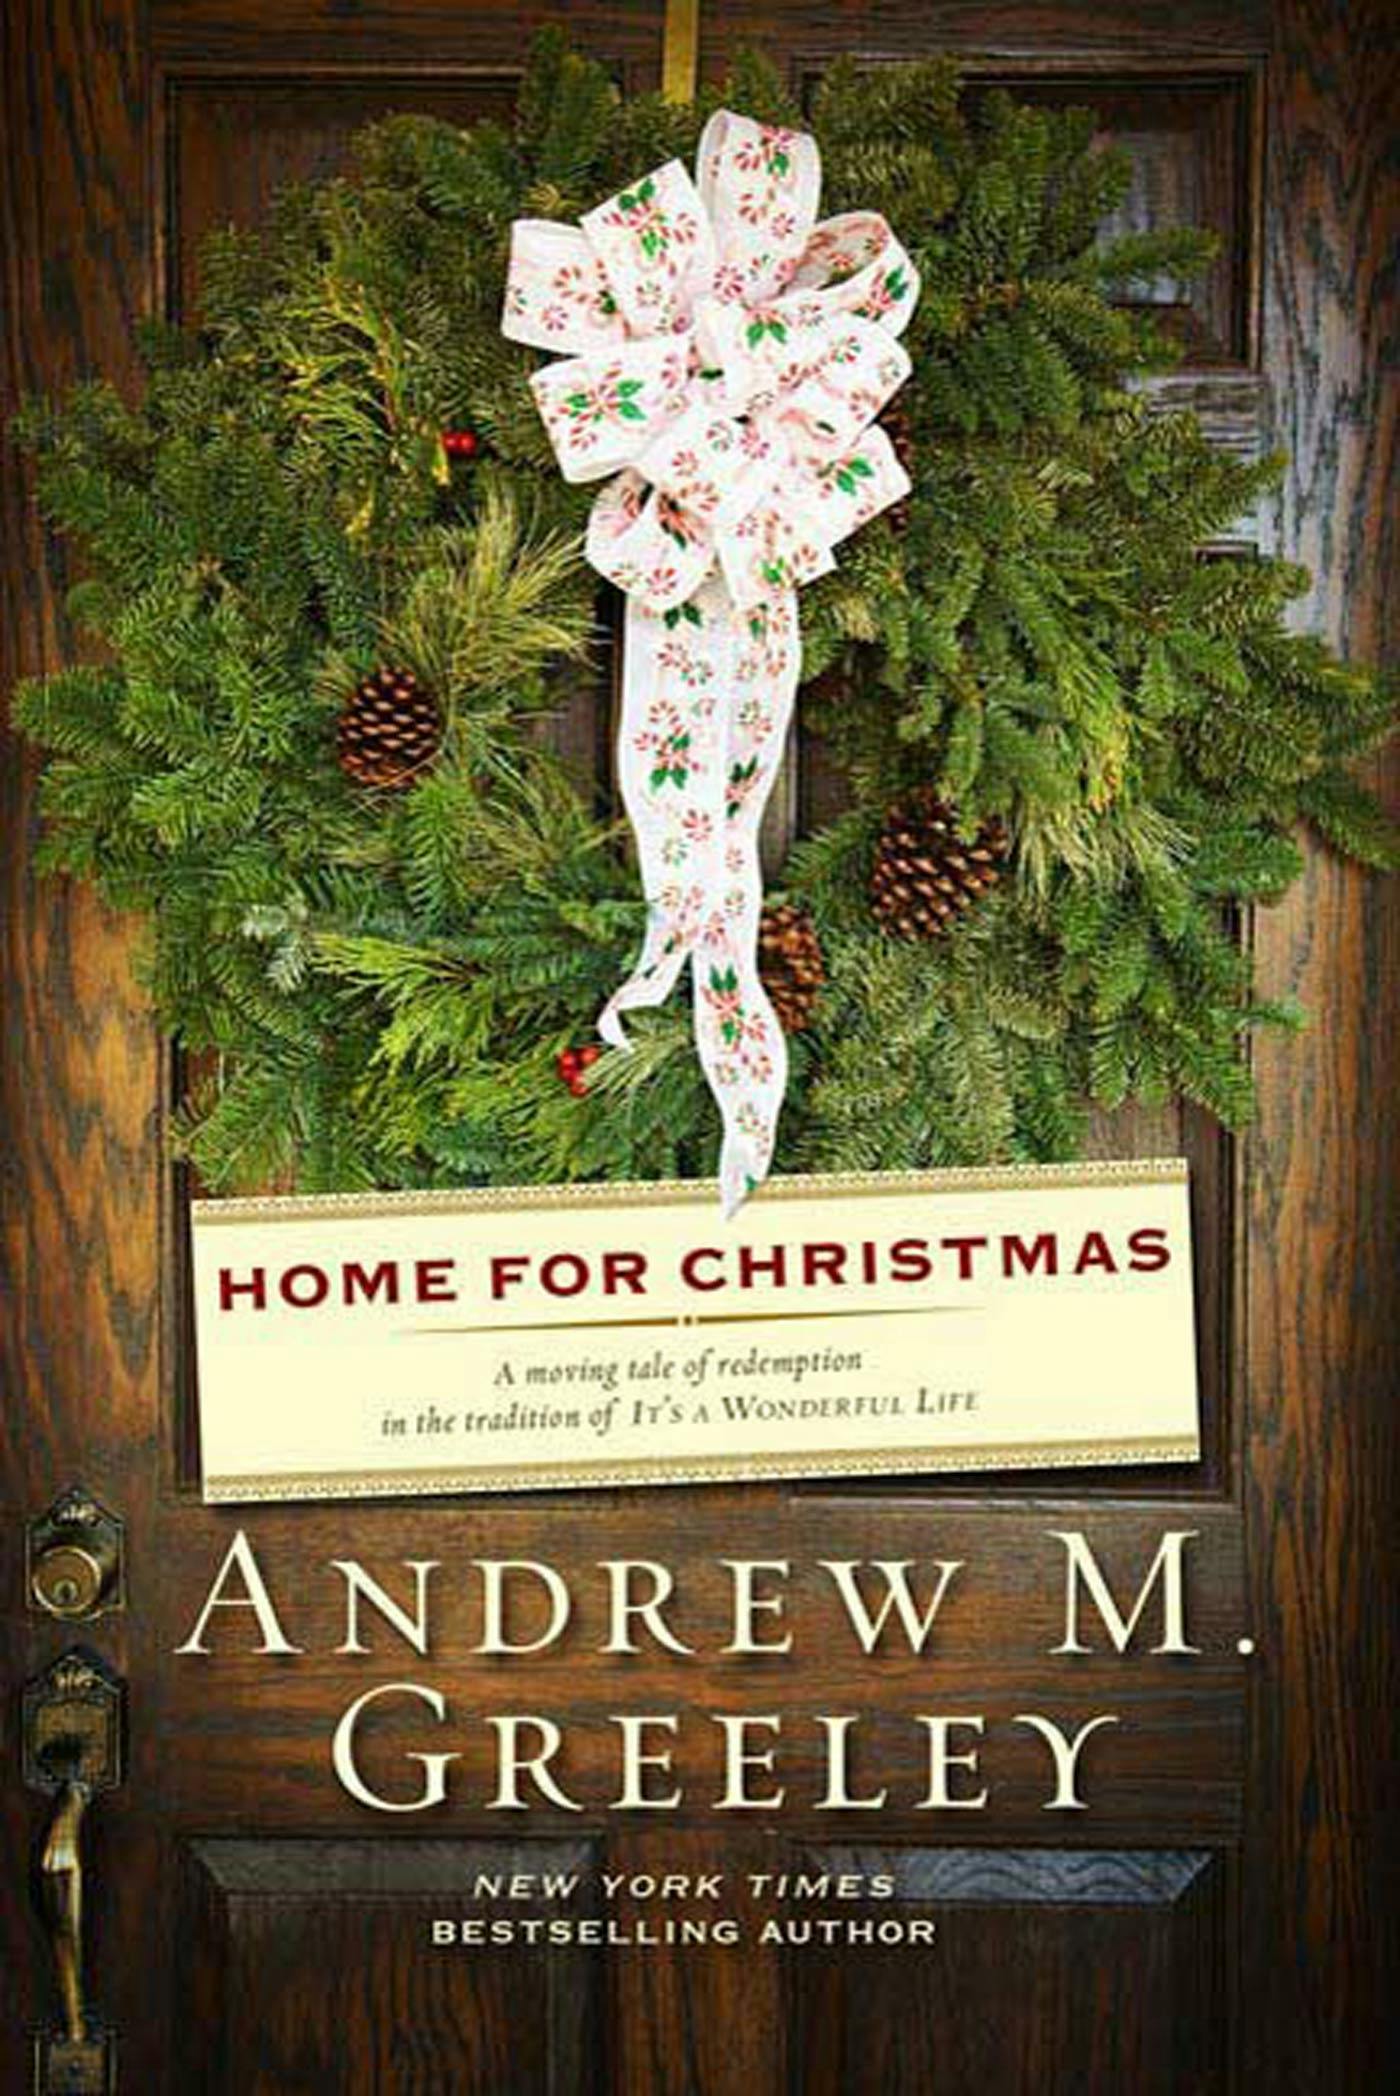 Cover for the book titled as: Home for Christmas